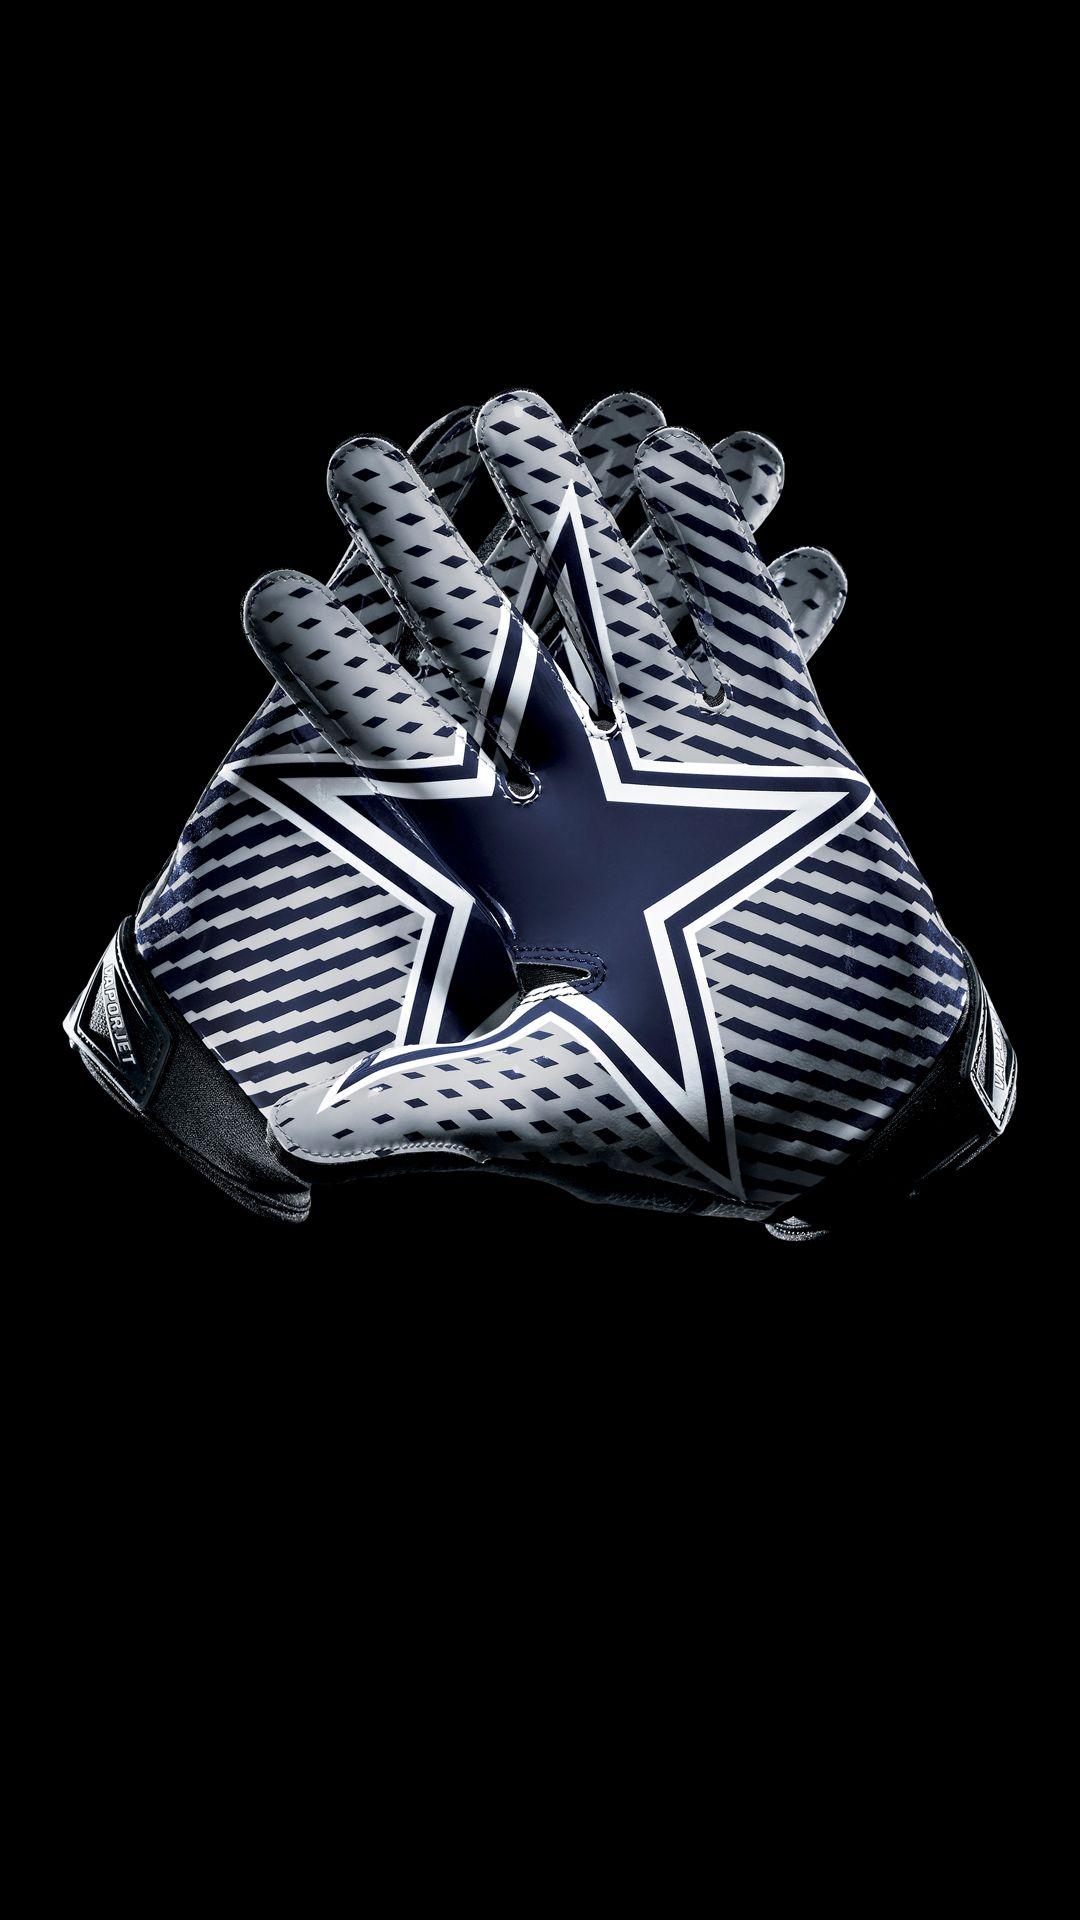 Dallas Cowboys Wallpaper For Cell Phones with dark background